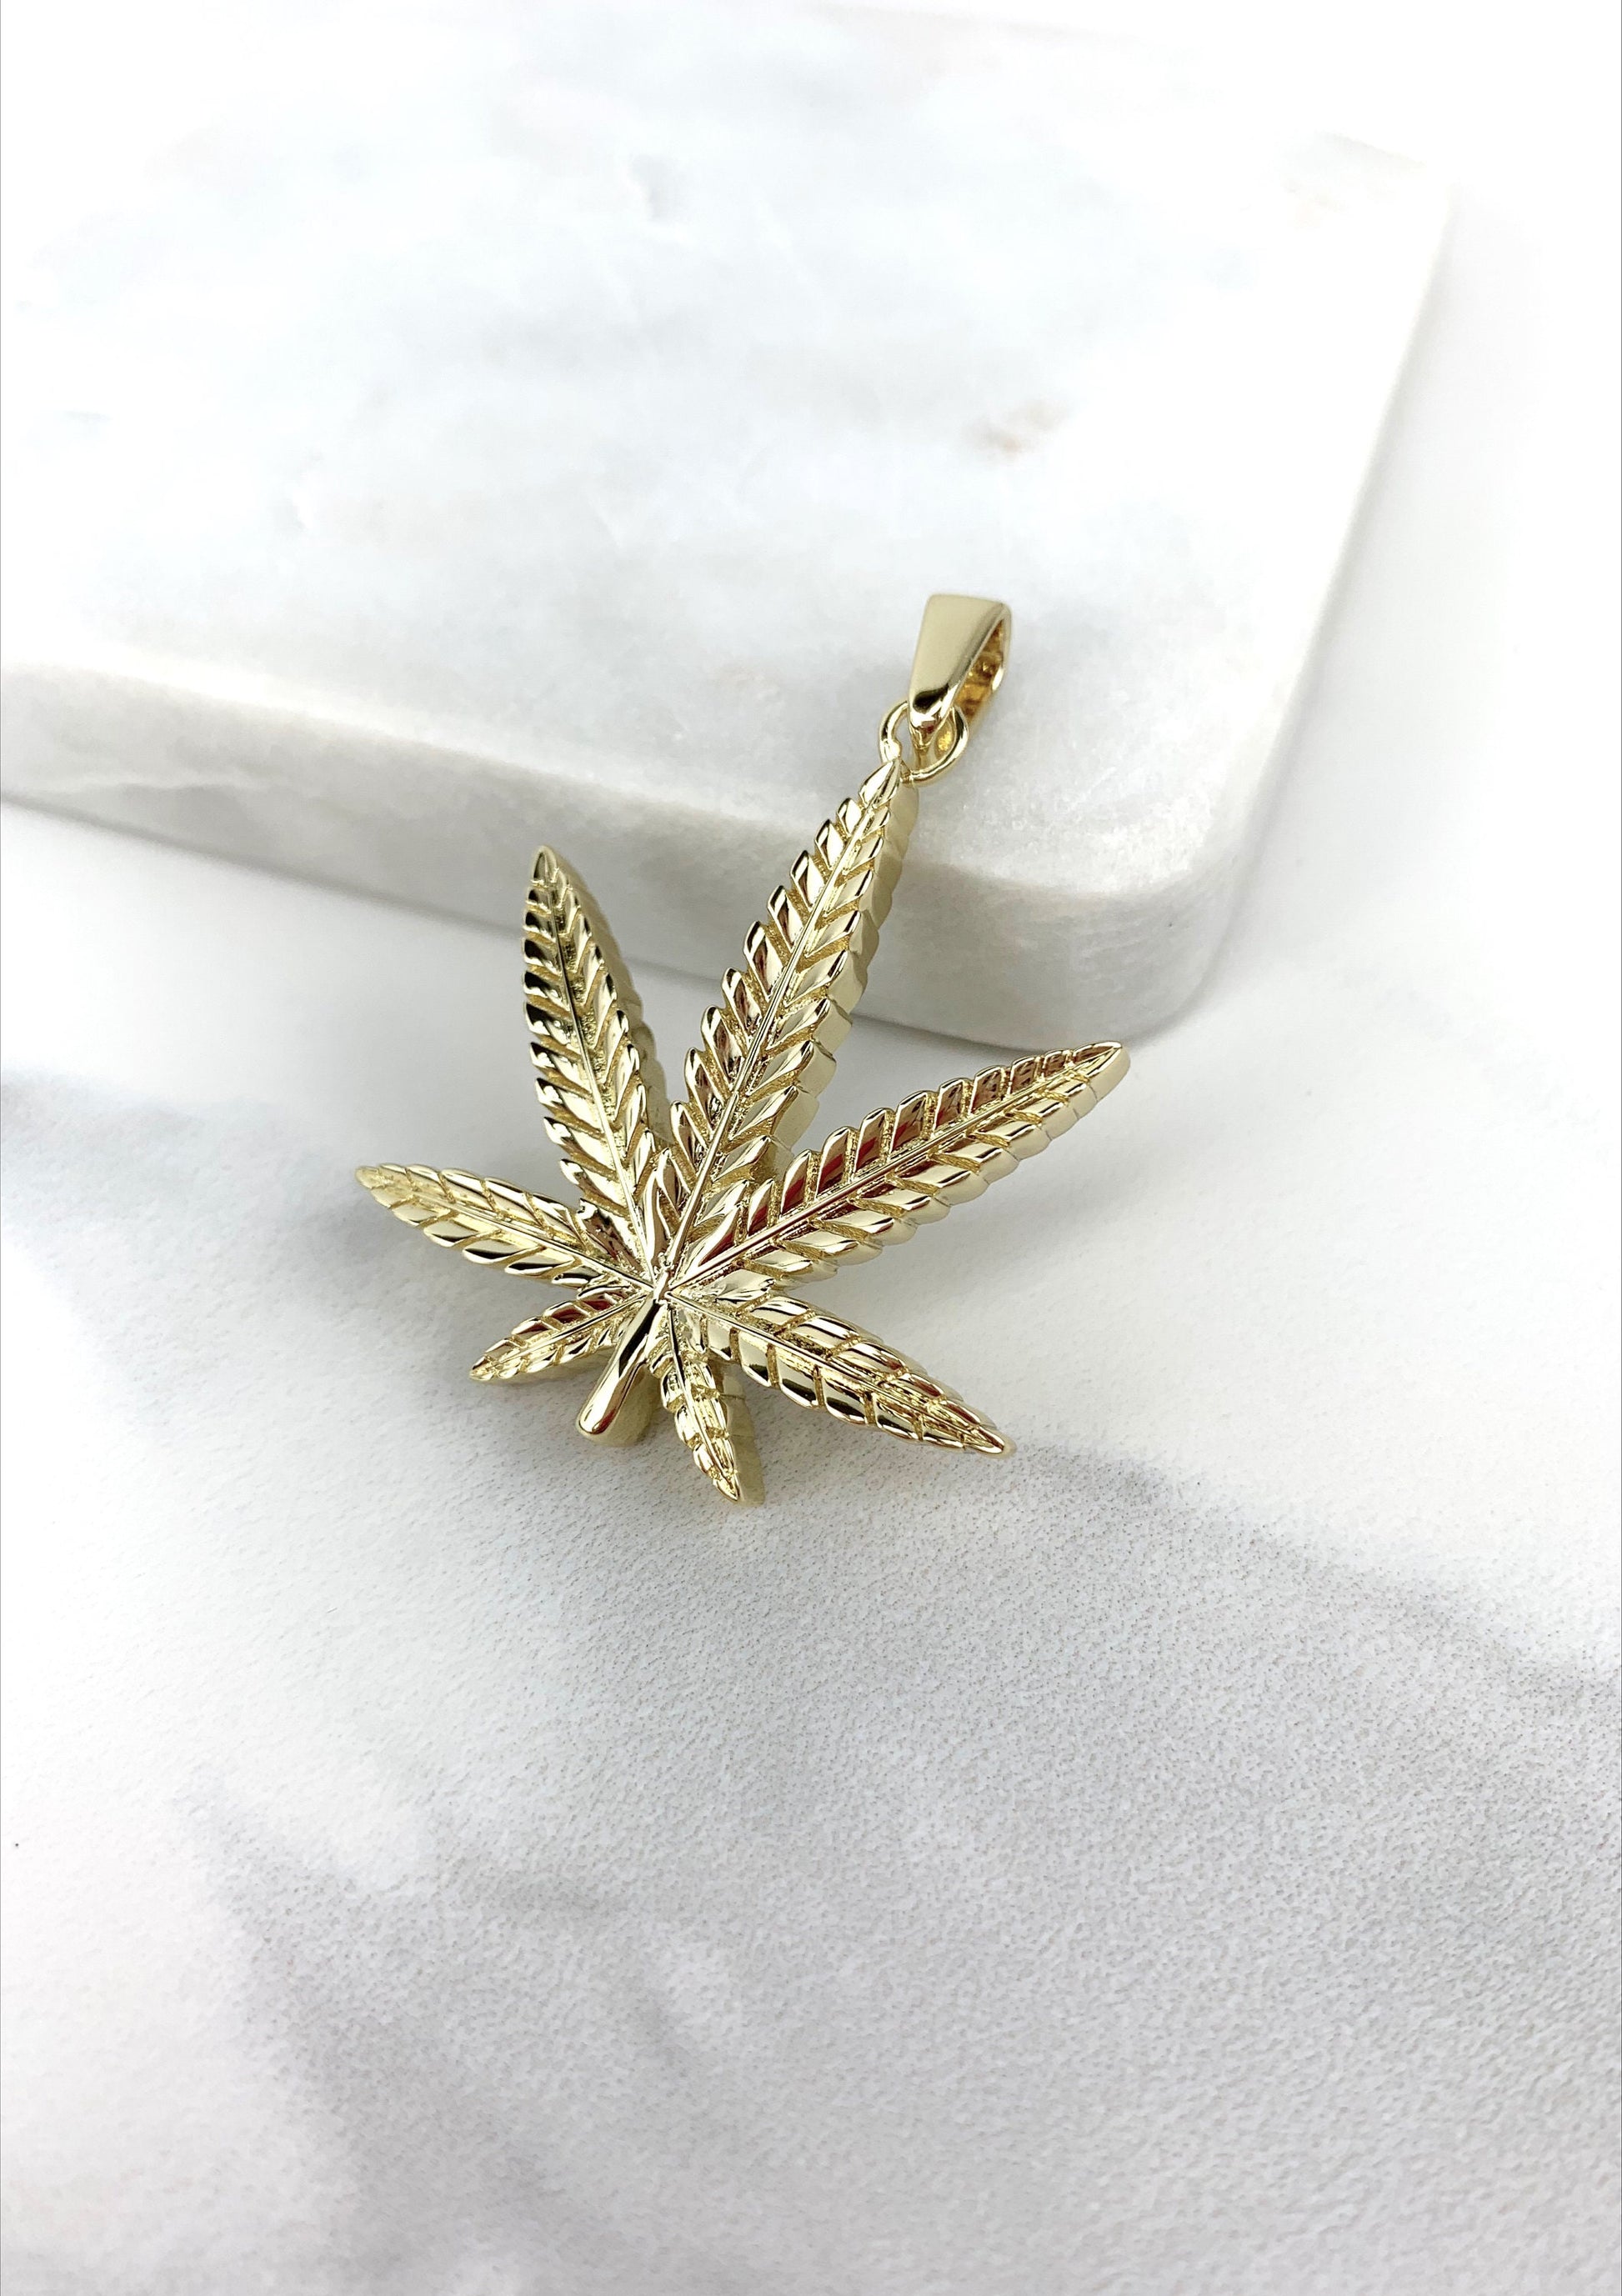 18k Gold Filled Fancy Cannabis Pendant Charms Wholesale Jewelry Supplies